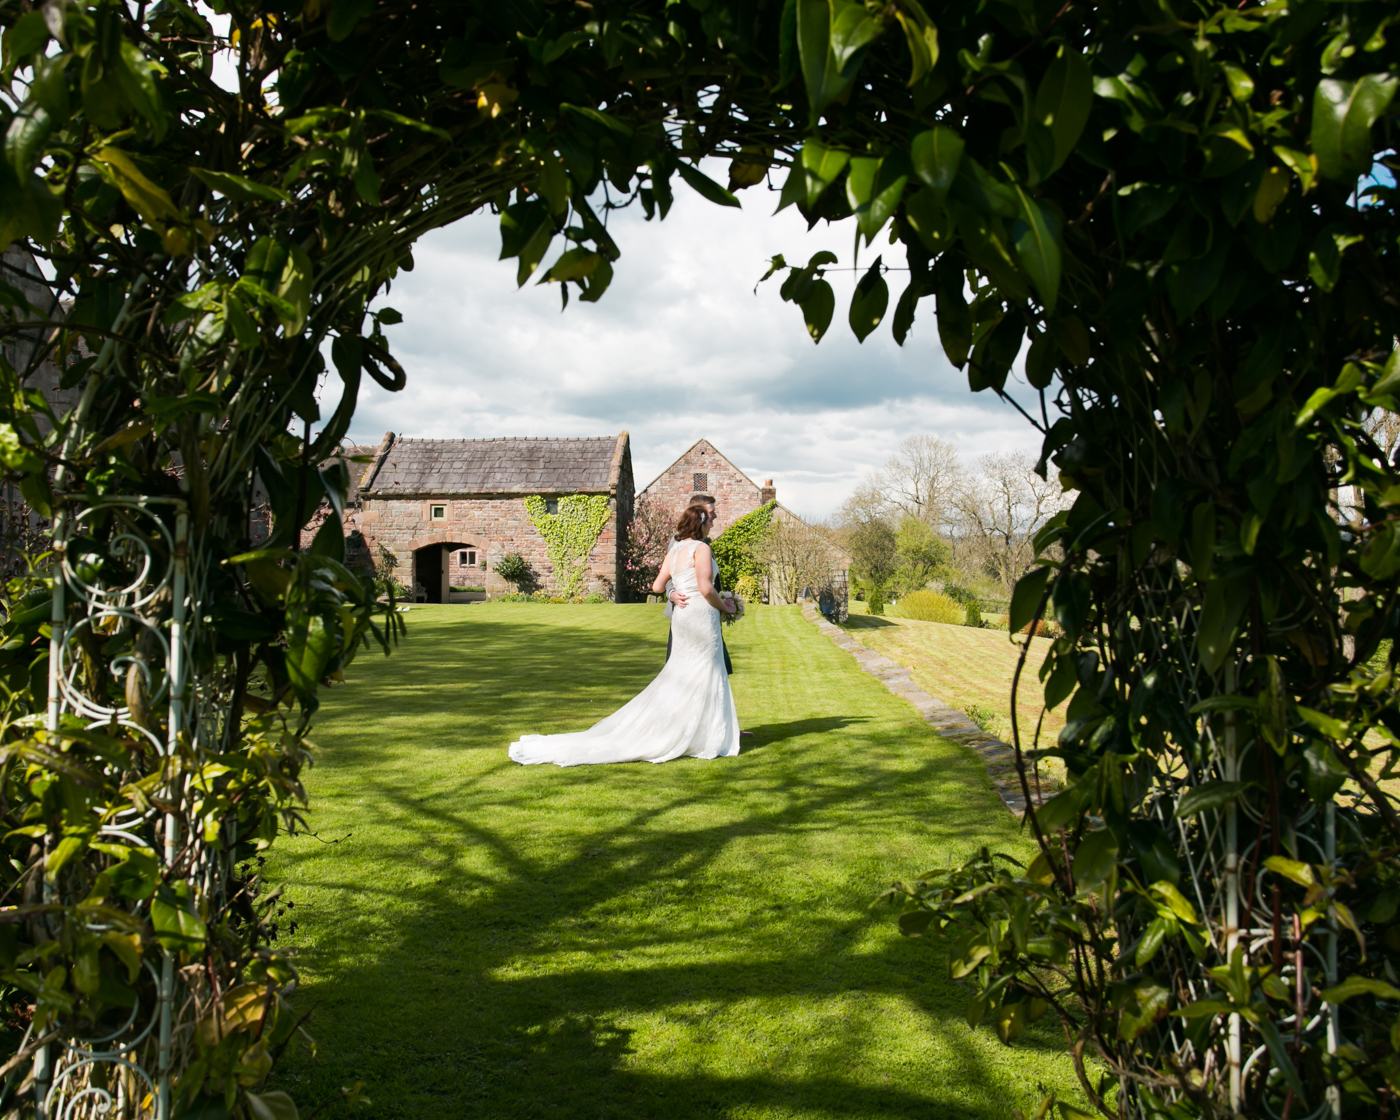 095 - Vicky and Neils Fine Art Wedding Photography at The Ashes Exclusive Country House Barn ST9 9AX by www.markpugh.com -0504.JPG